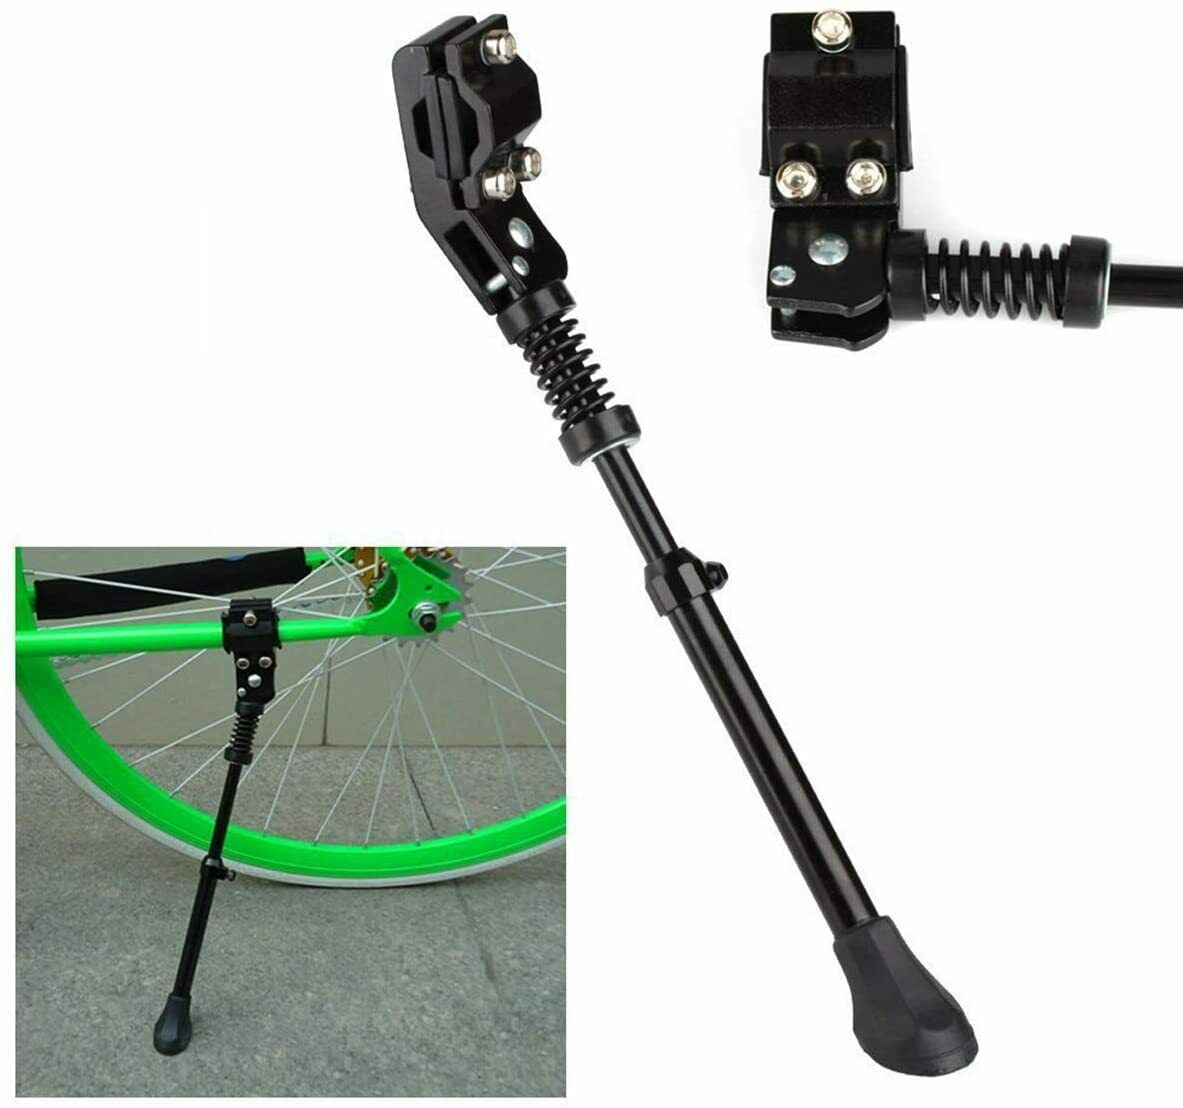 Details about   Mountain Bike Kickstand Bicycle Kick Stand MTB Road Adjustable Side Universal US 